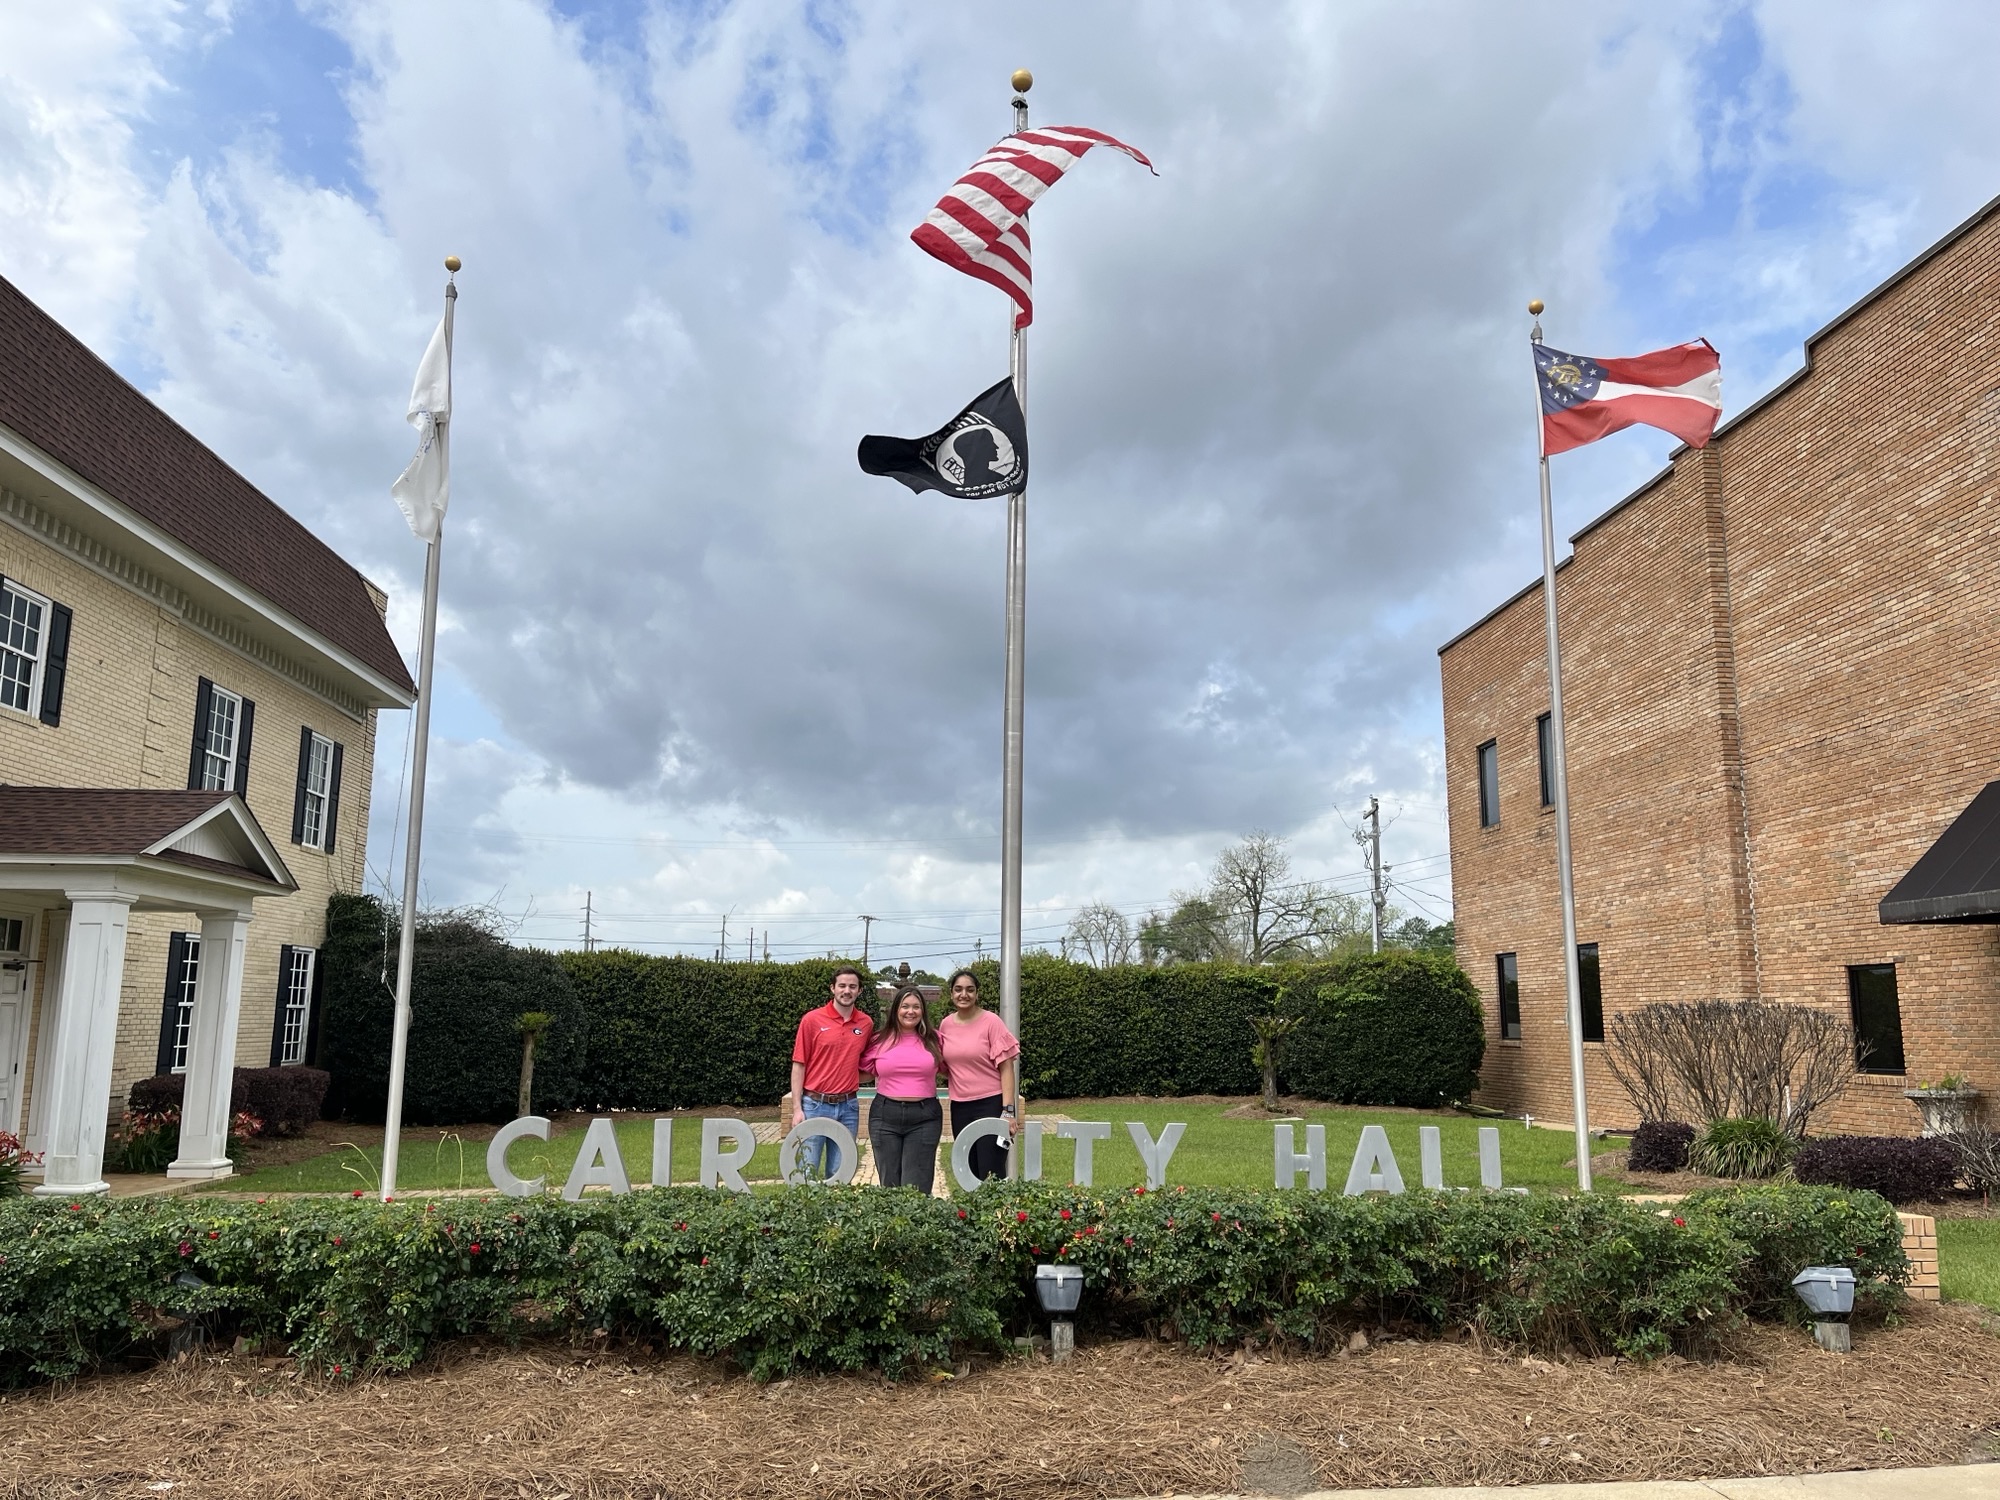 Three PROPEL Rural Scholars who have been working with the Grady PROPEL team traveled to Grady County to visit some local attractions. 